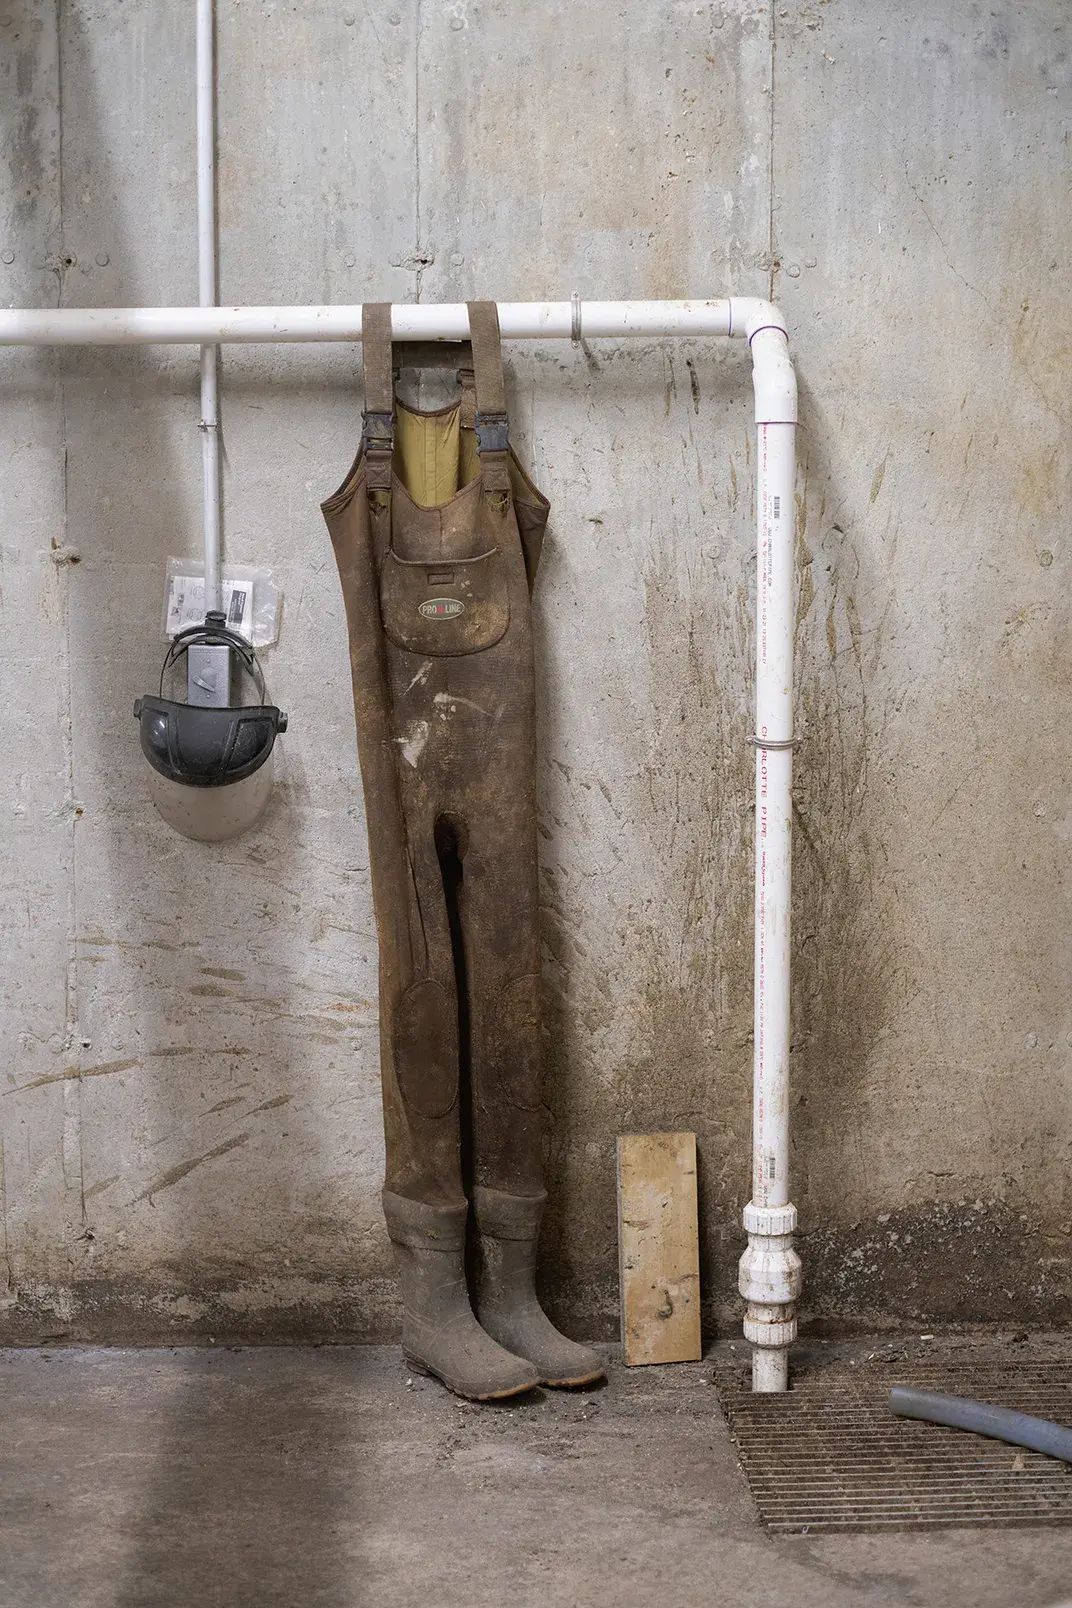 At Goodrich Farm, well-worn overalls hang on pipes that carry manure out of the cow barns.